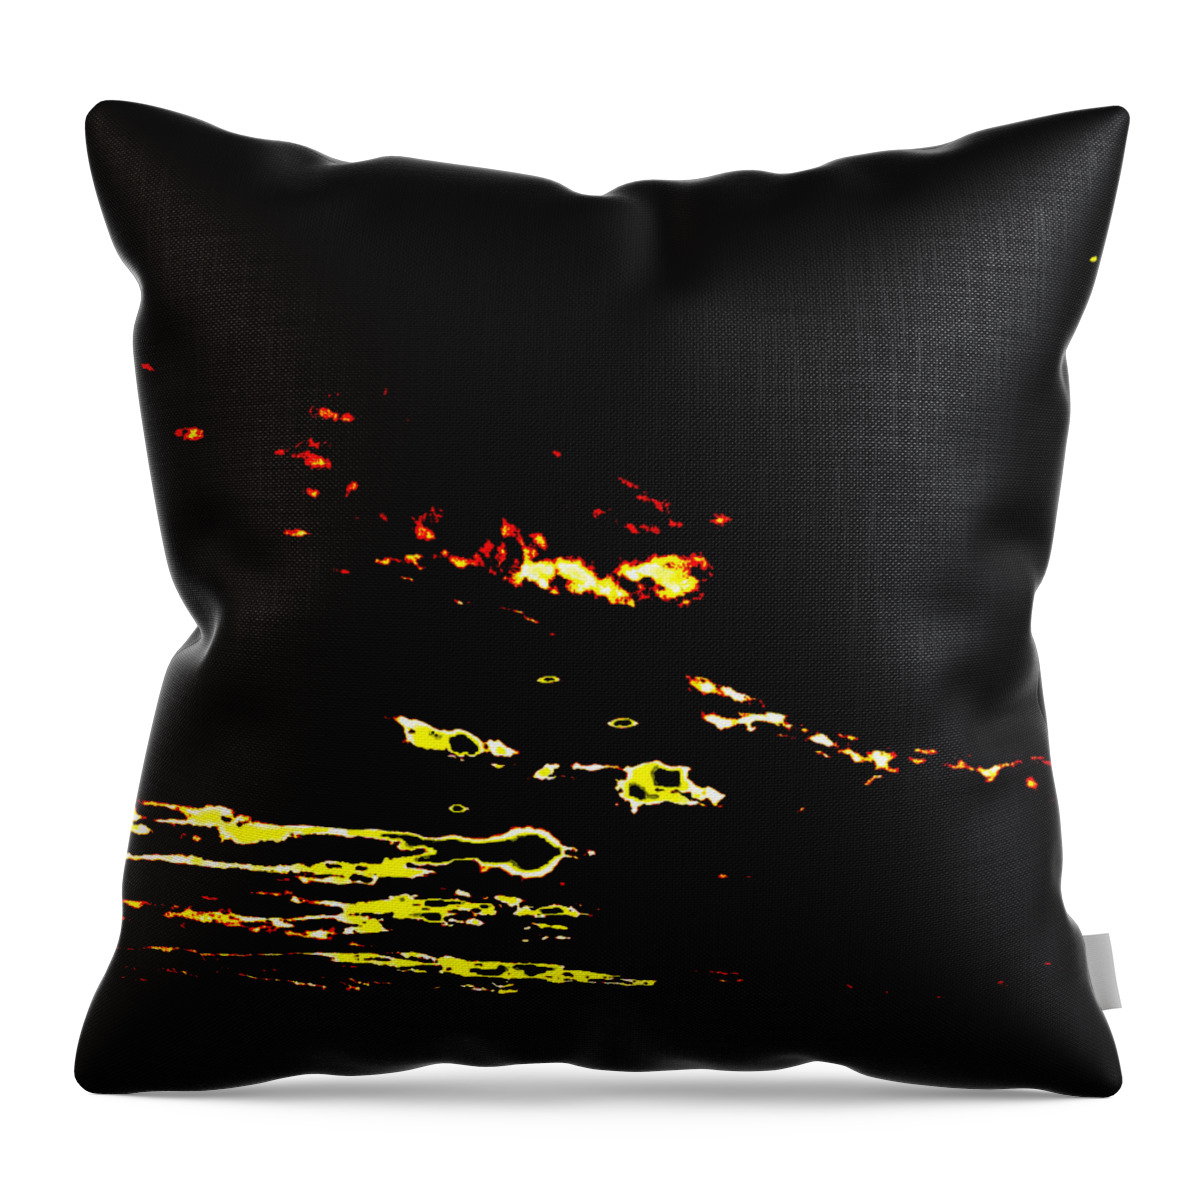  Throw Pillow featuring the photograph Chastity 2 by Trevor A Smith